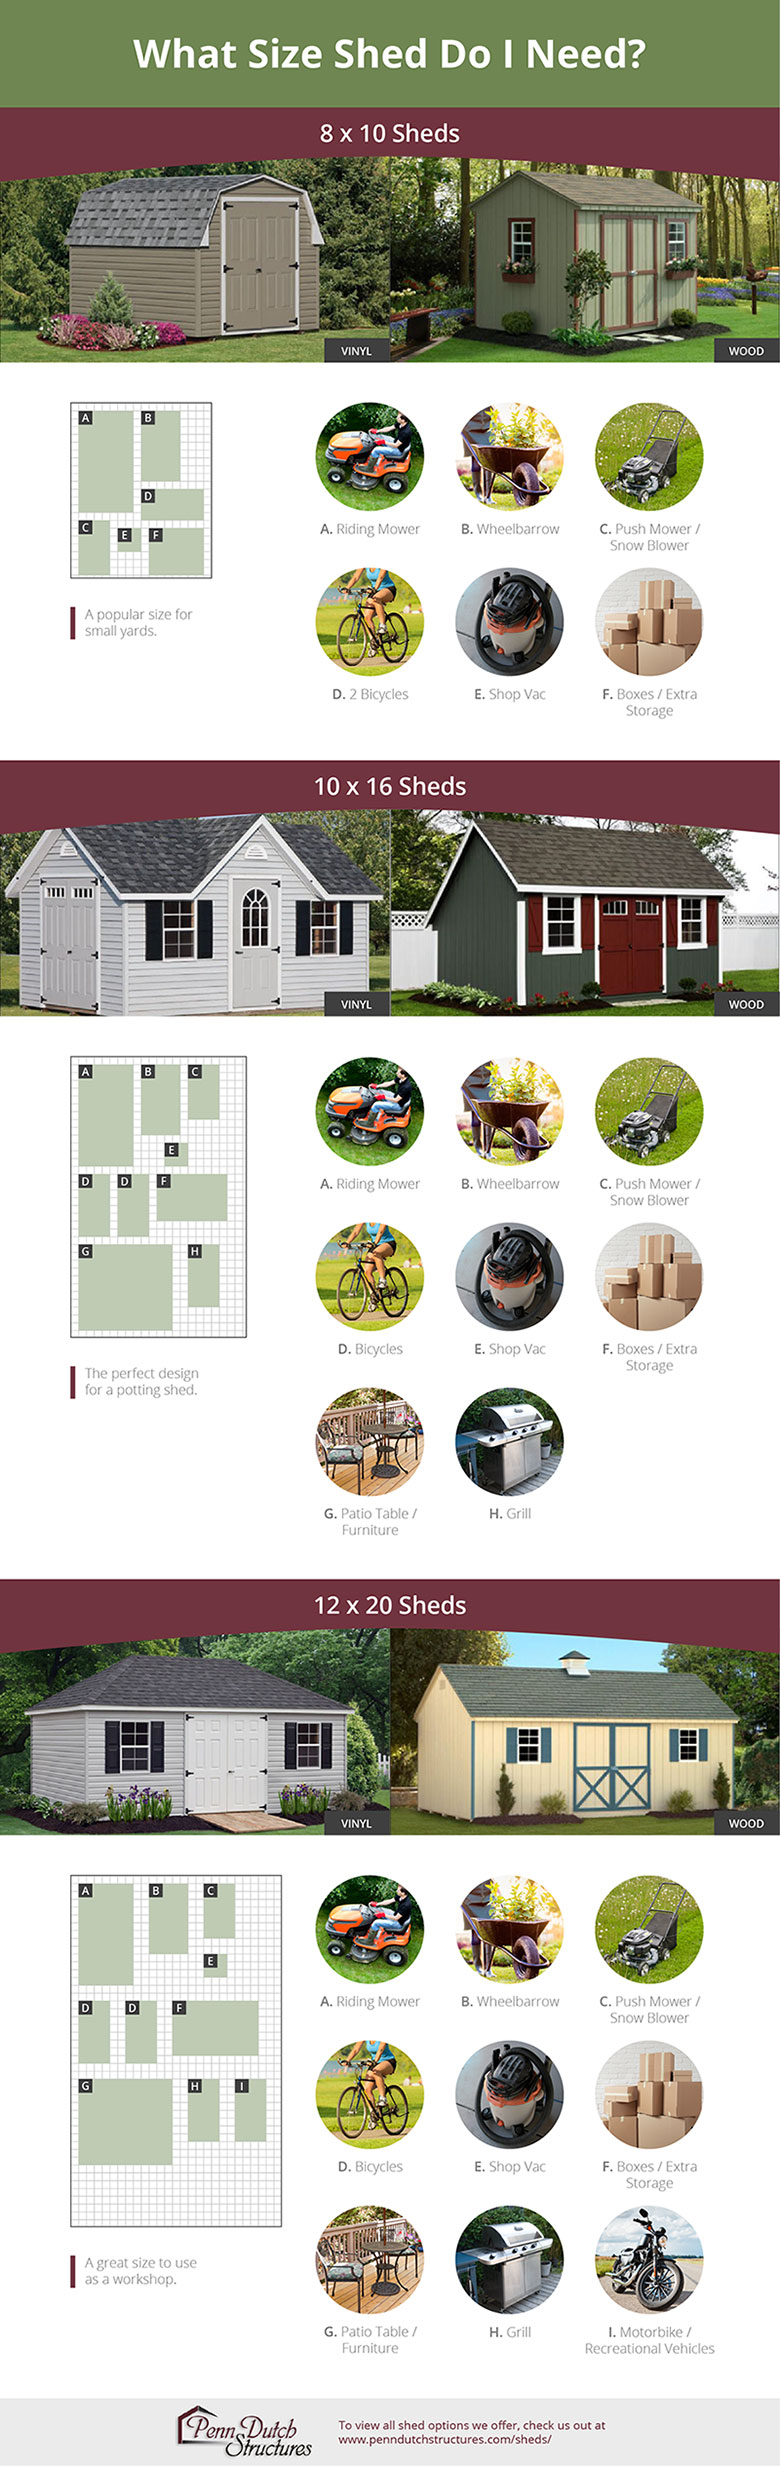 Informative guide to deciding "what size shed do I need? depicting 8x10 sheds, 10x16 sheds, and 12x20 sheds with various examples of storage items.